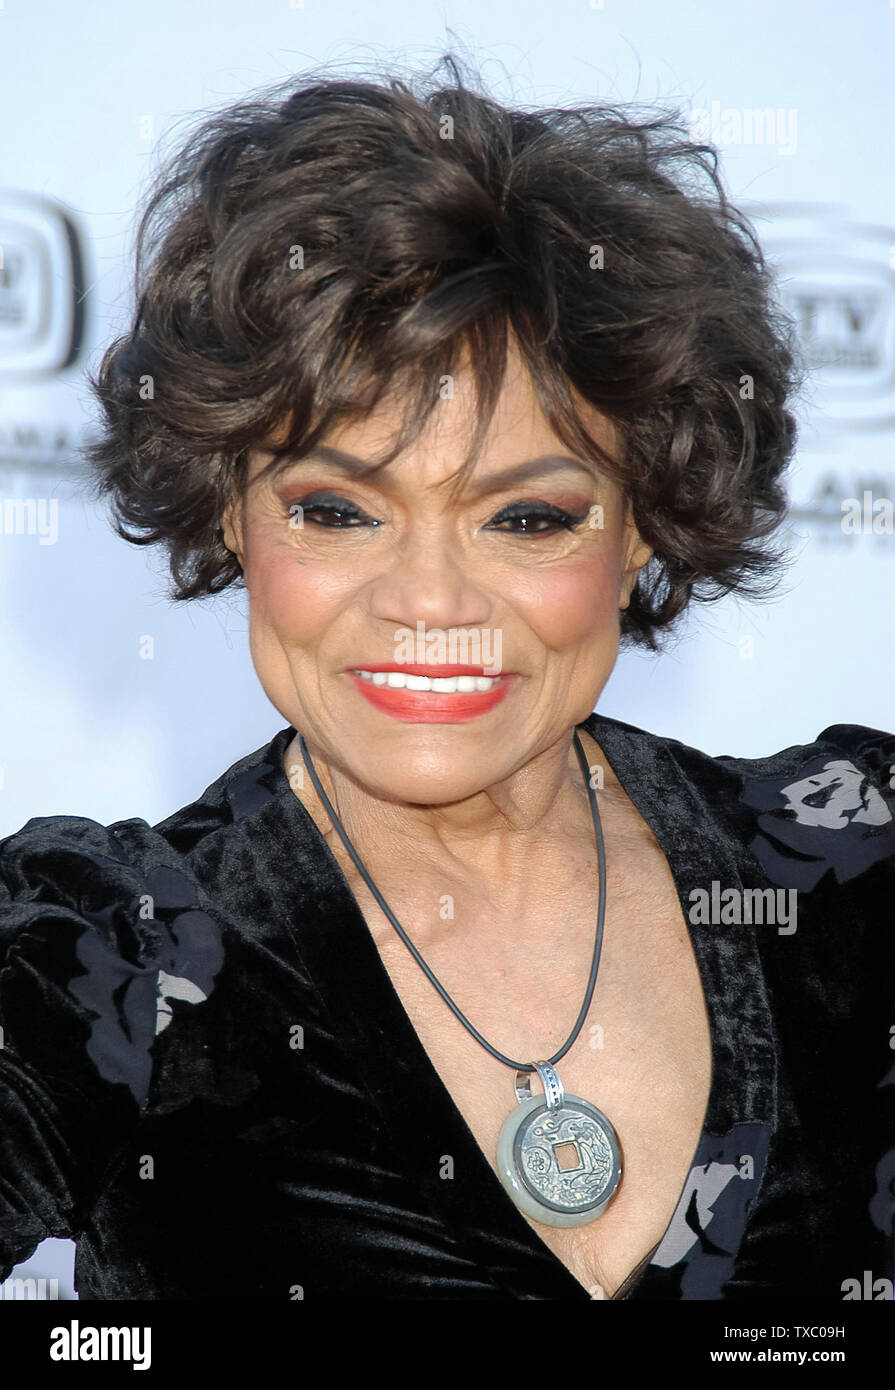 Eartha Kitt at the 2004 TV Land Awards - Arrivals at the Hollywood Palladium in Hollywood, CA. The event took place on Sunday, March 7, 2004. Photo by: SBM / PictureLux  -  File Reference # 33790-4299SMBPLX Stock Photo